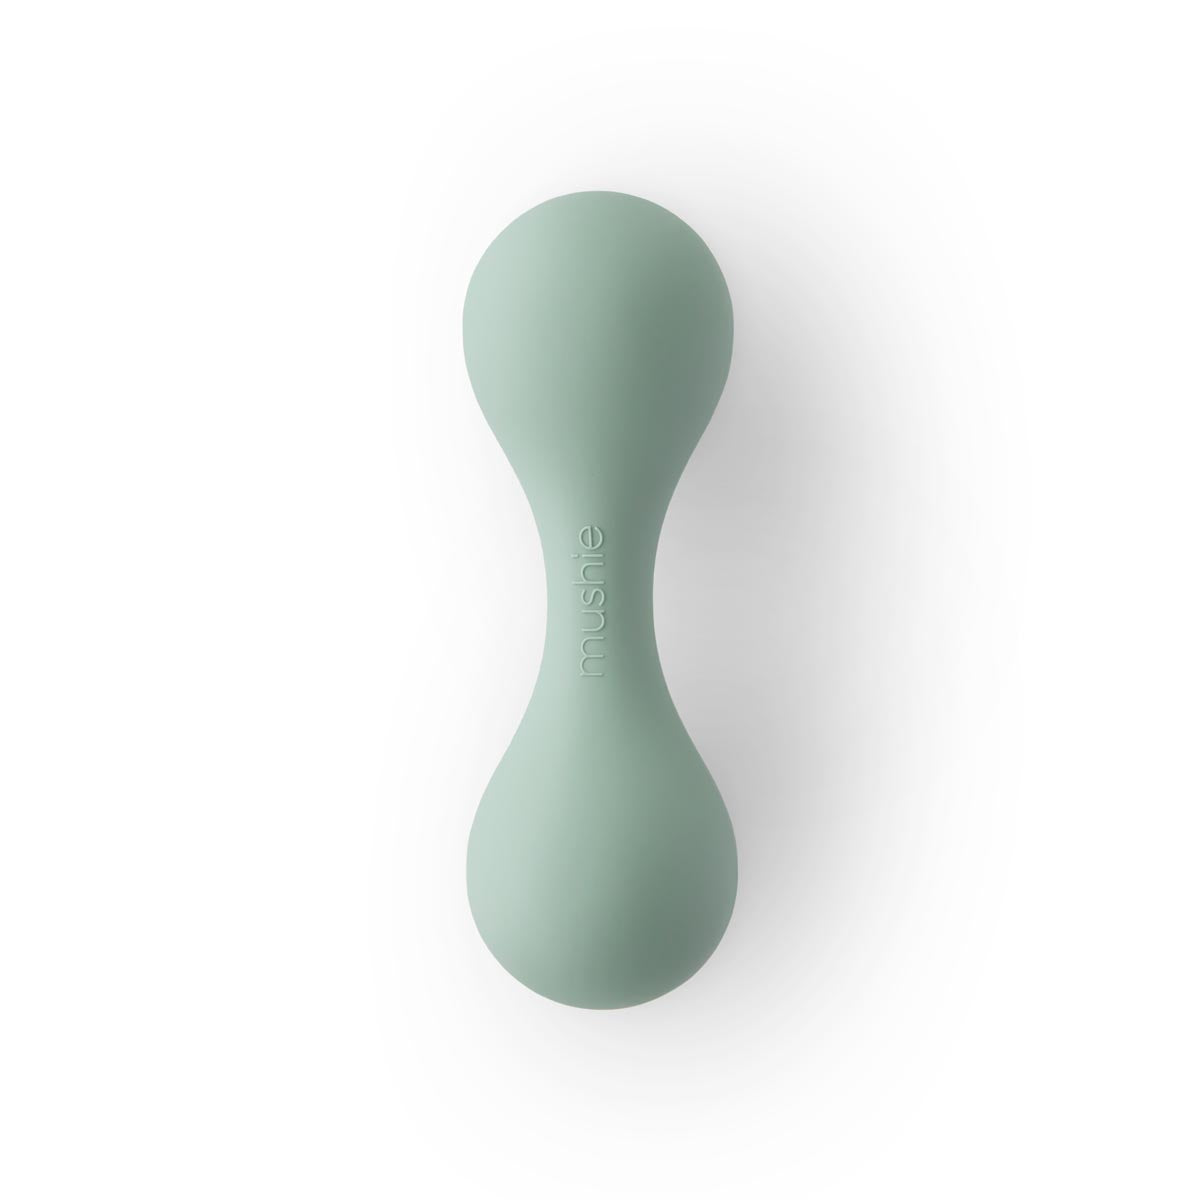 Mushie Silicone Baby Rattle